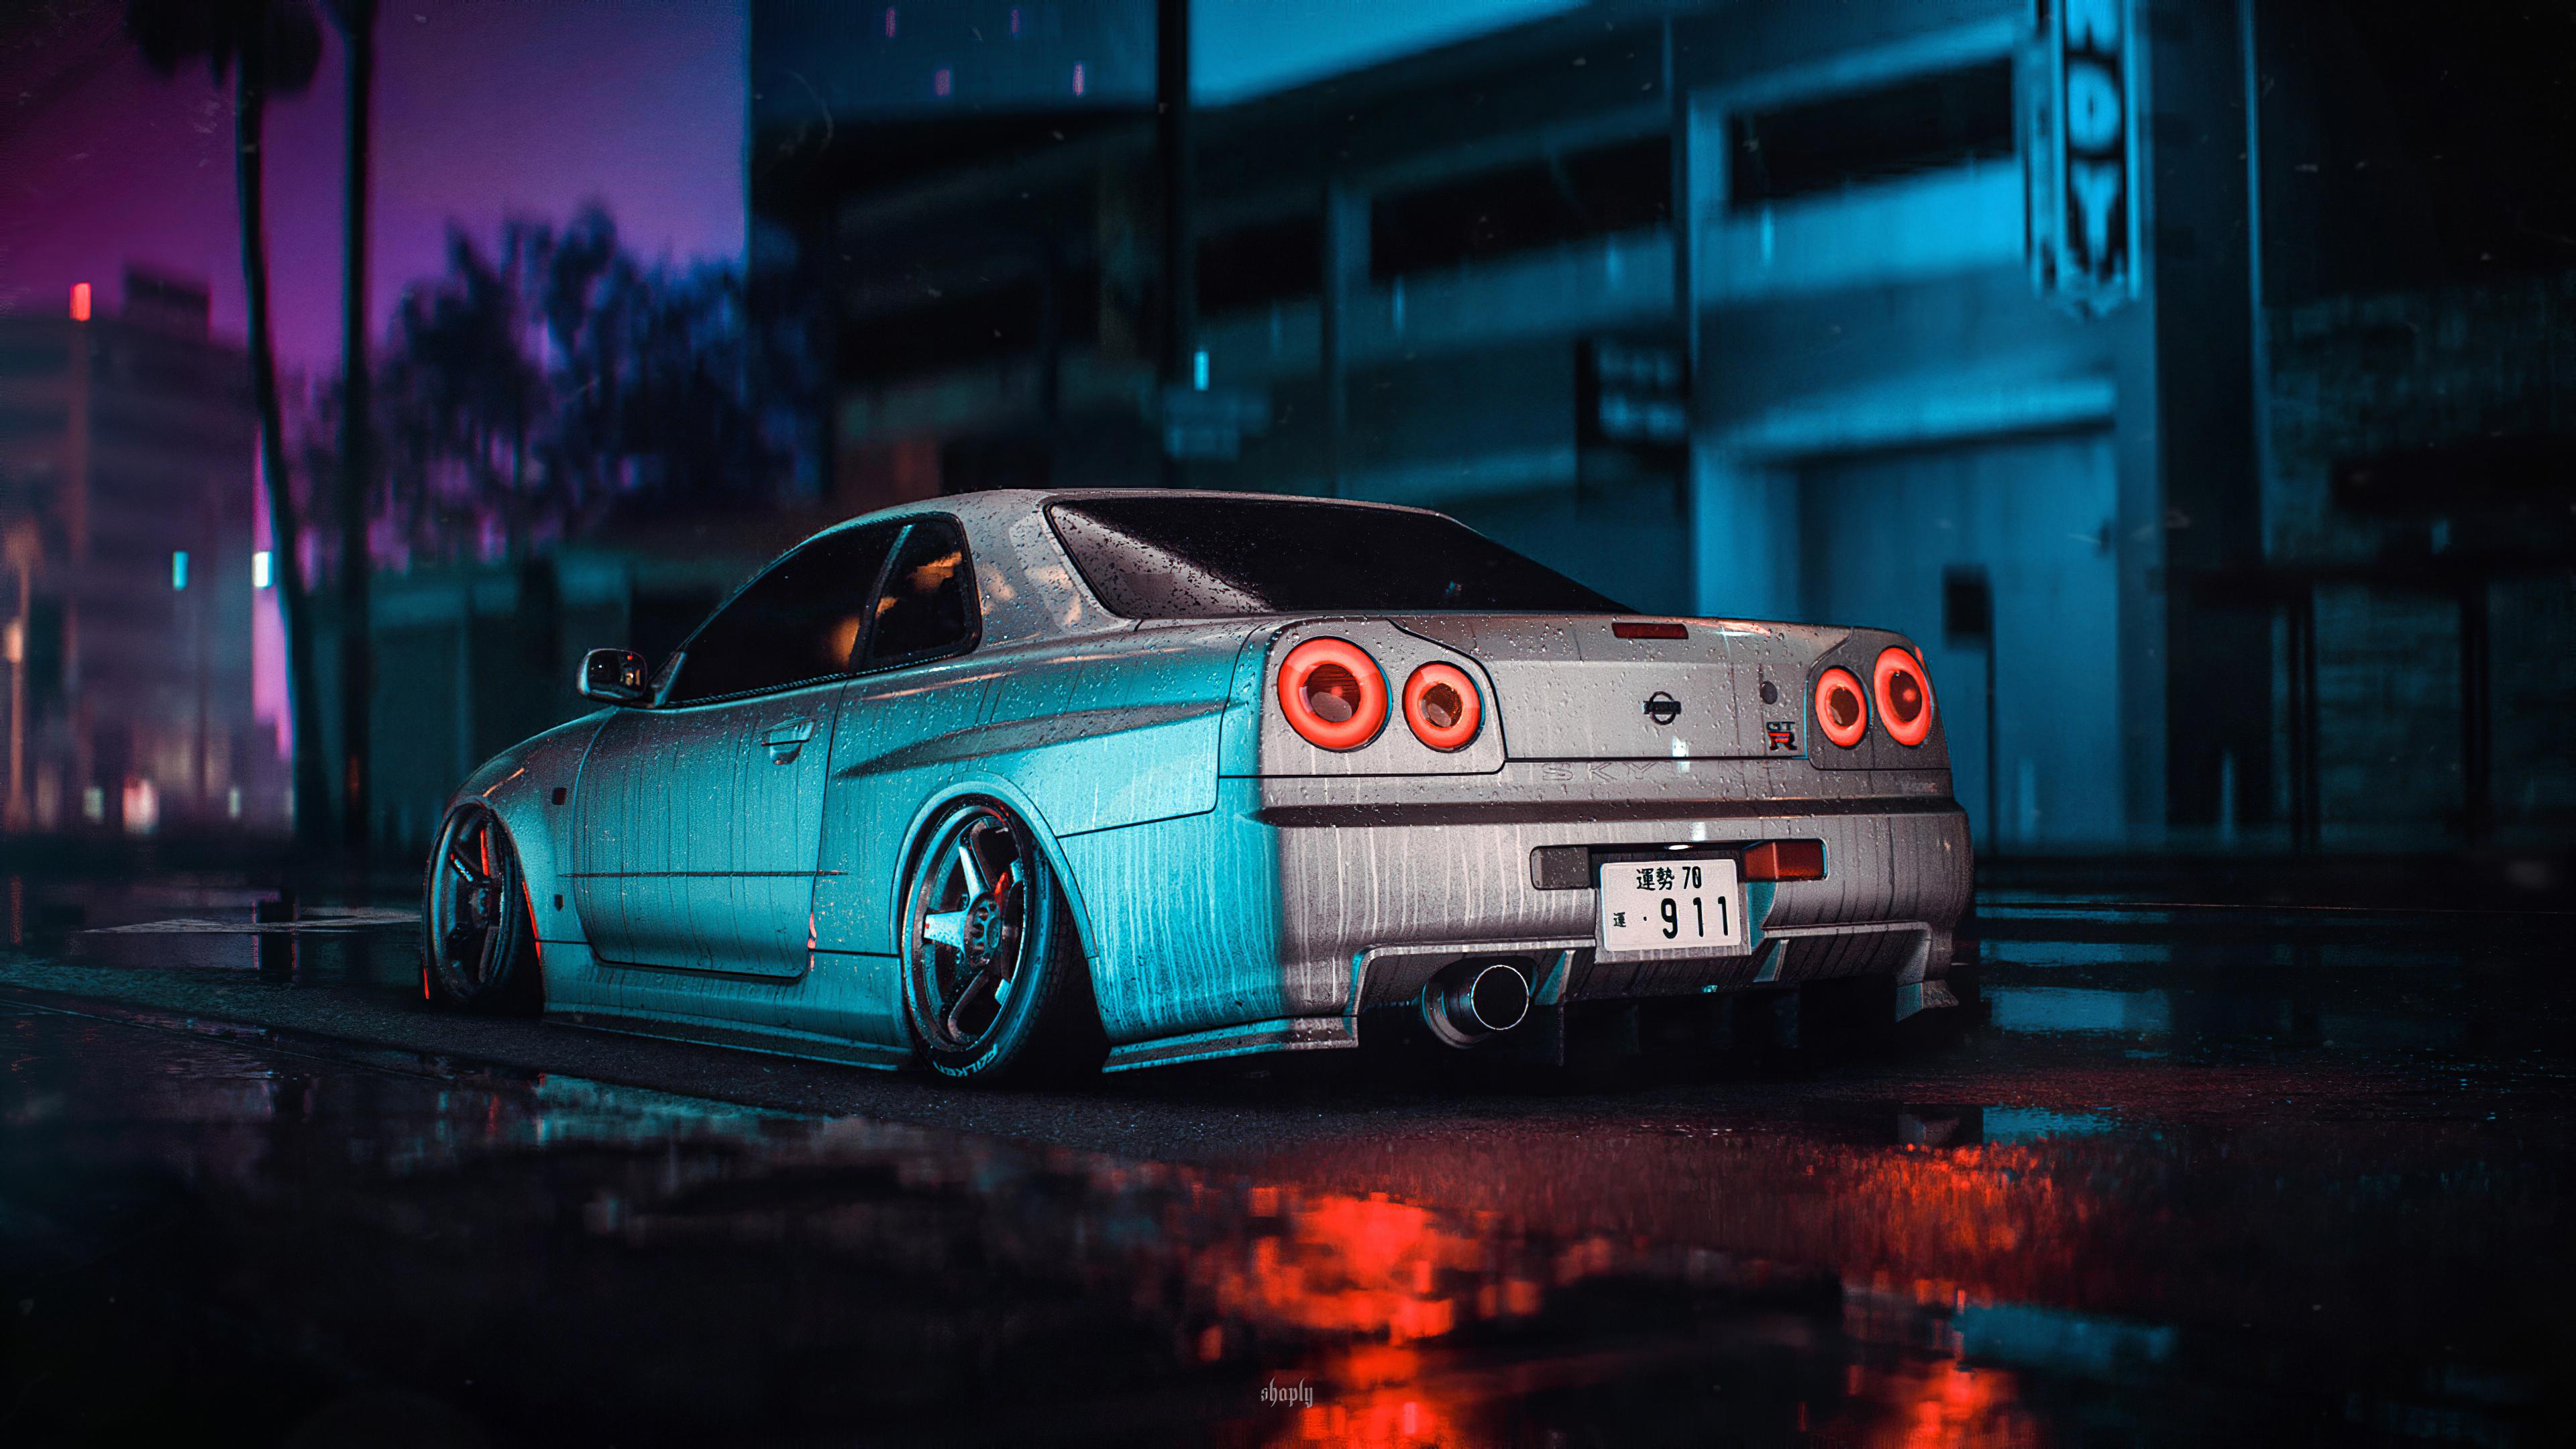 Nissan 4K wallpaper for your desktop or mobile screen free and easy to download